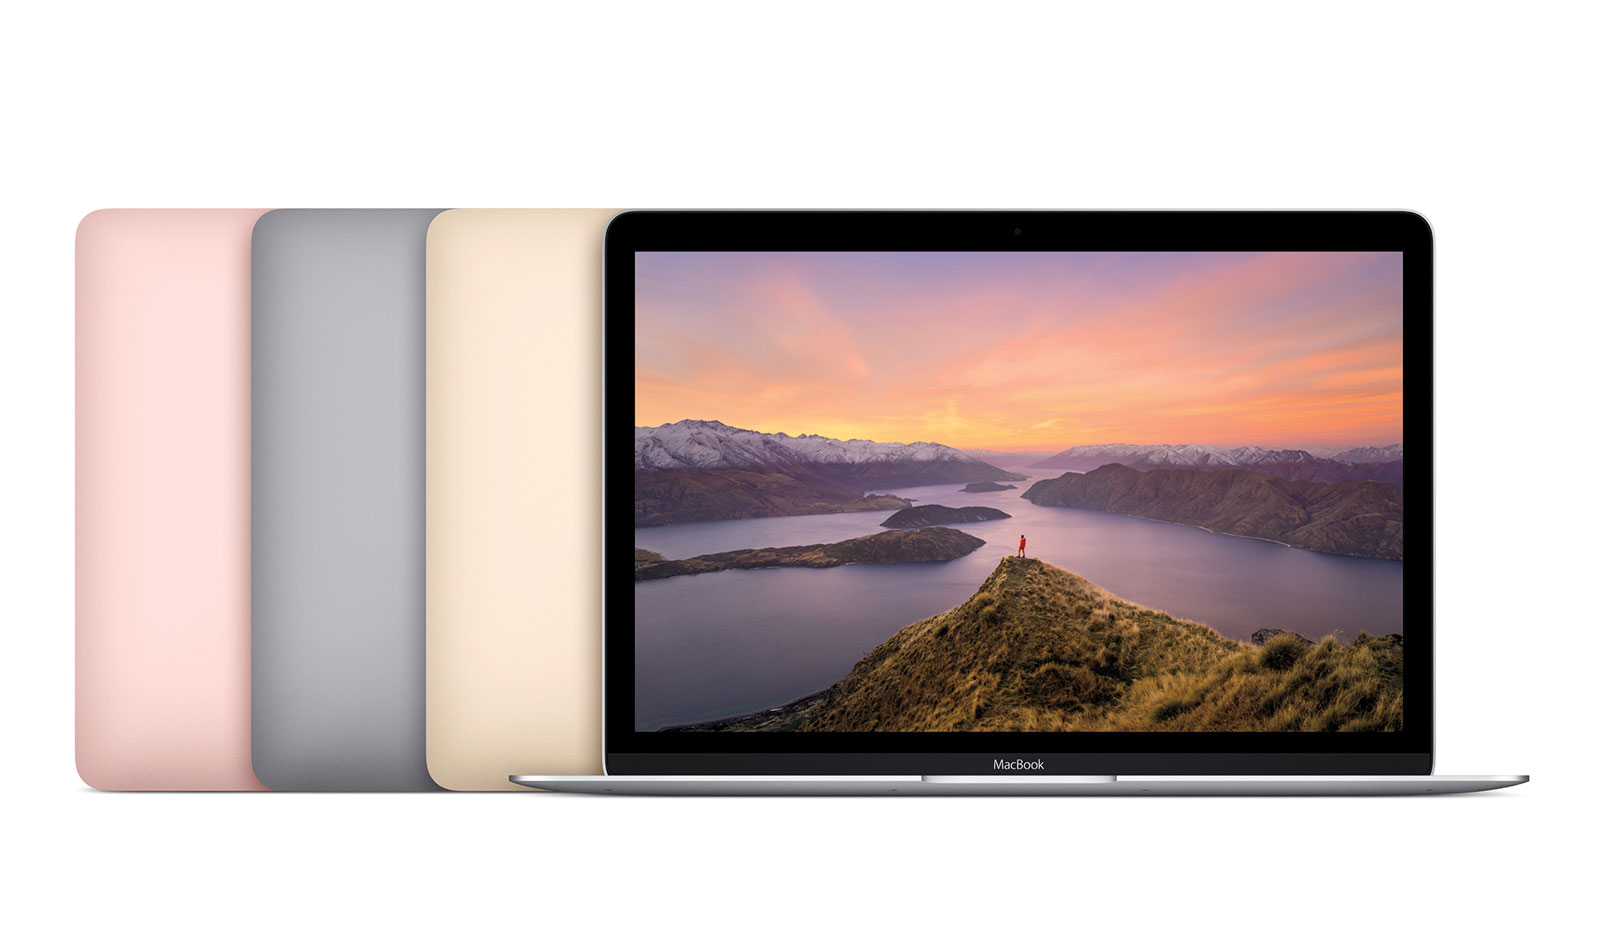 Apple upgrades its MacBook series and adds a rose gold option